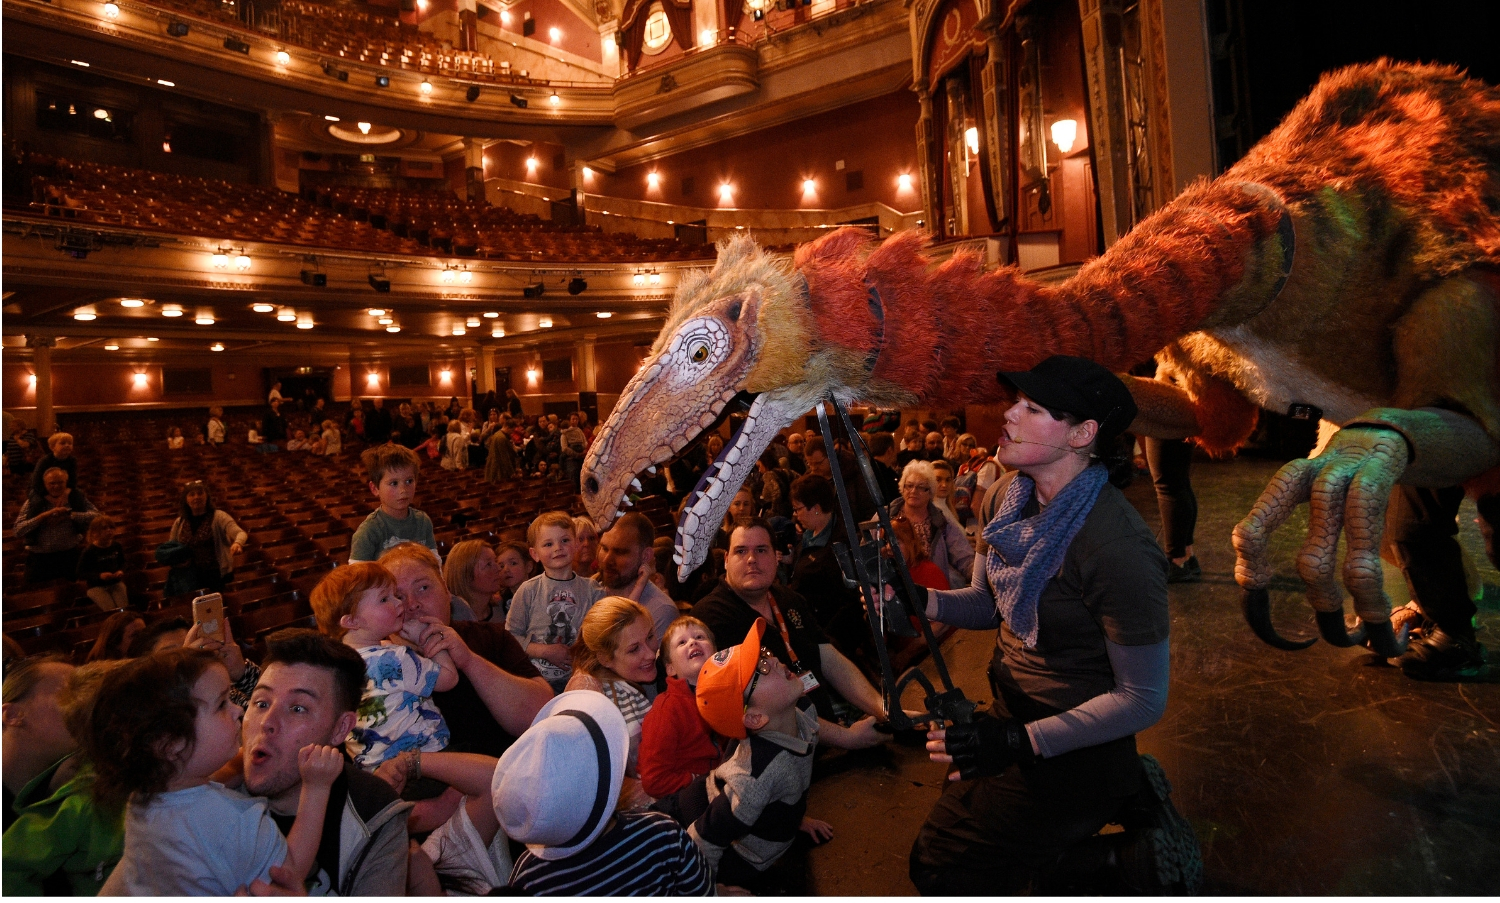 Orange dragon coming out from the stage to meet some of the audience (Capital Theatres). Image by: Greg Macvean